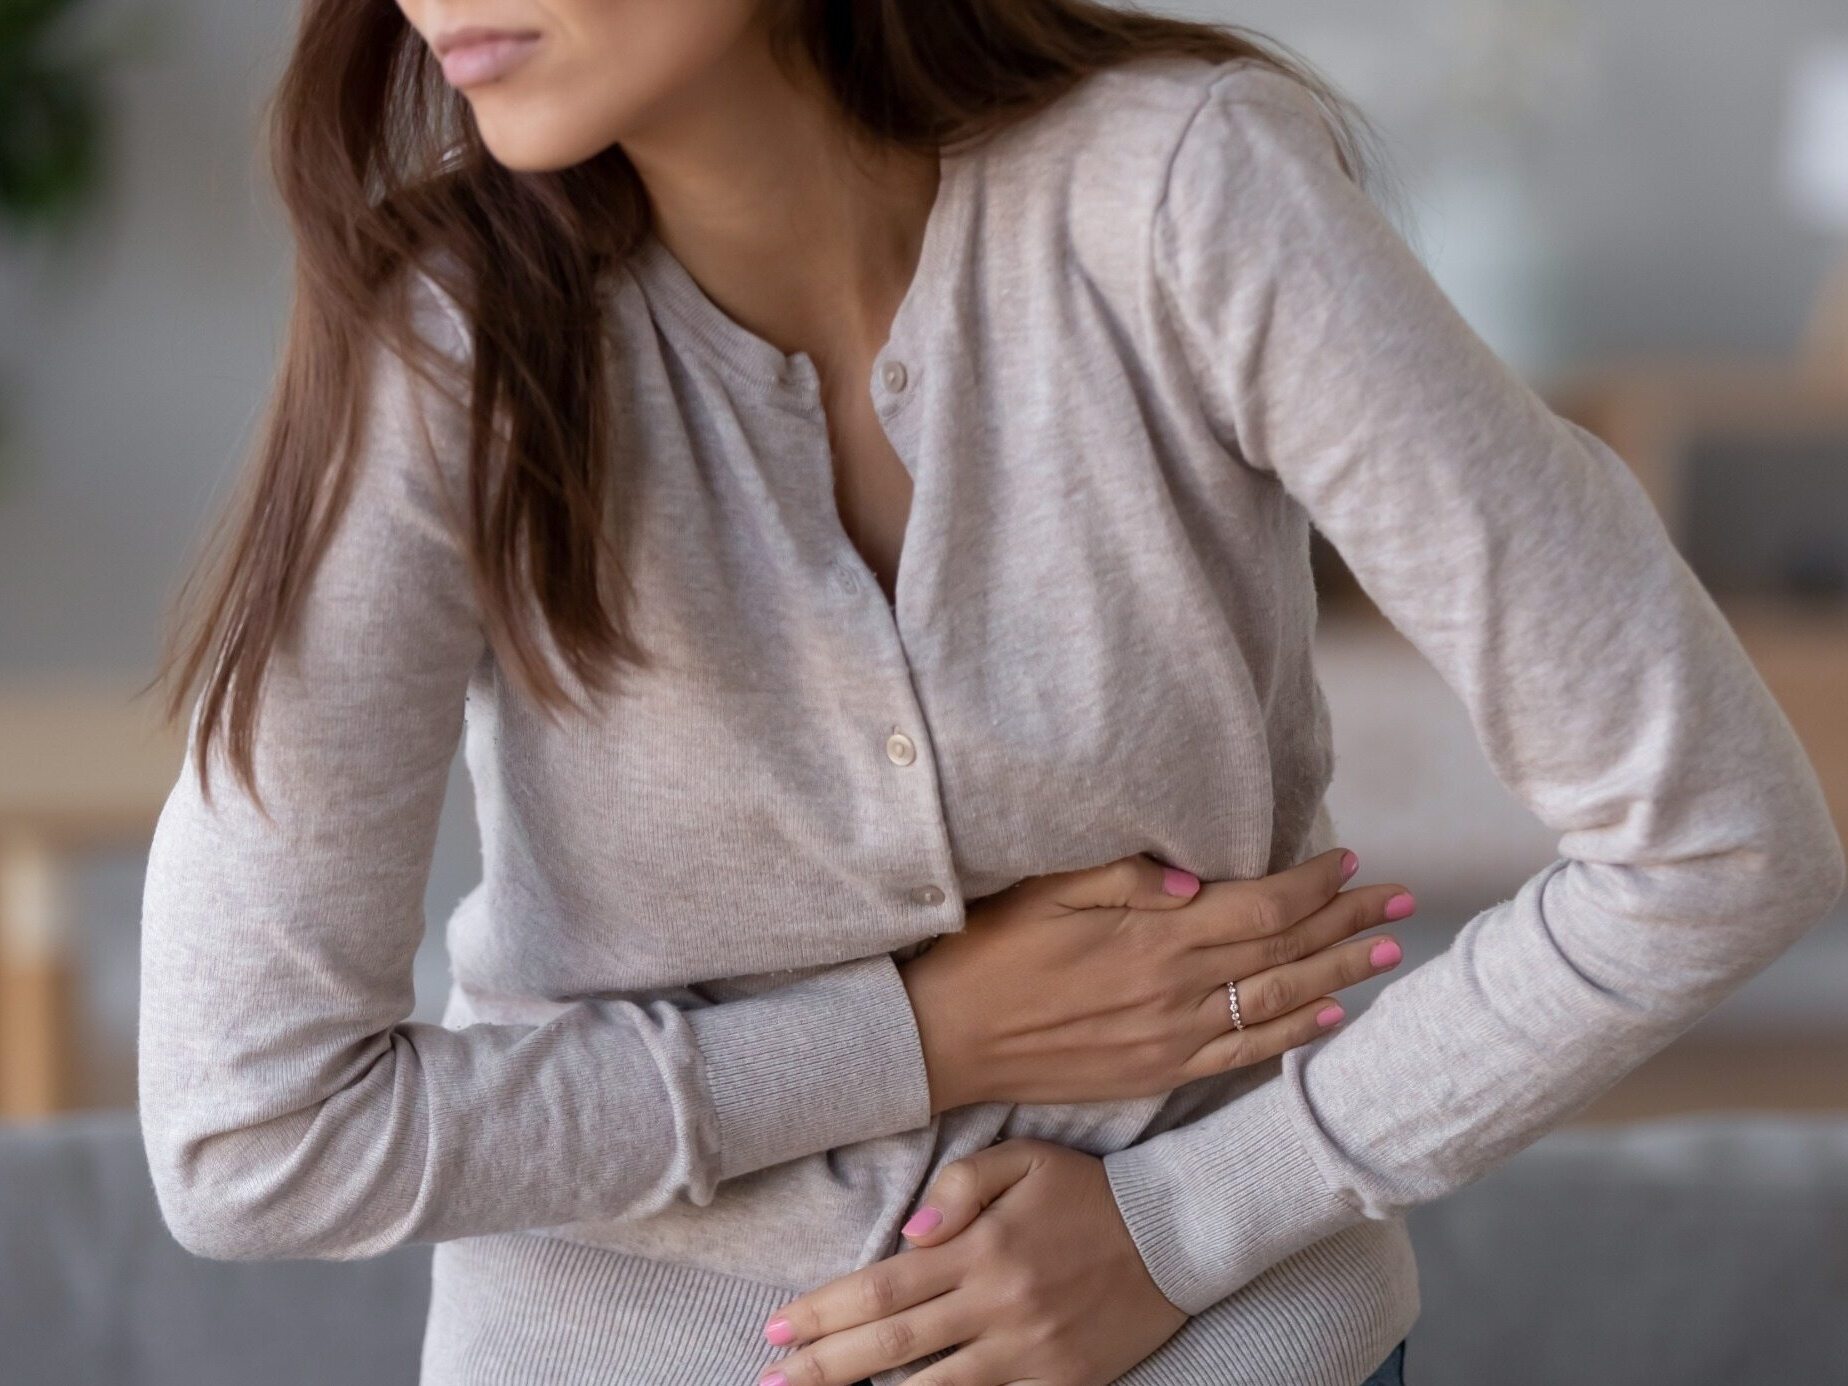 What to eat and what to avoid when suffering from stomach pain?  The most common causes of ailments